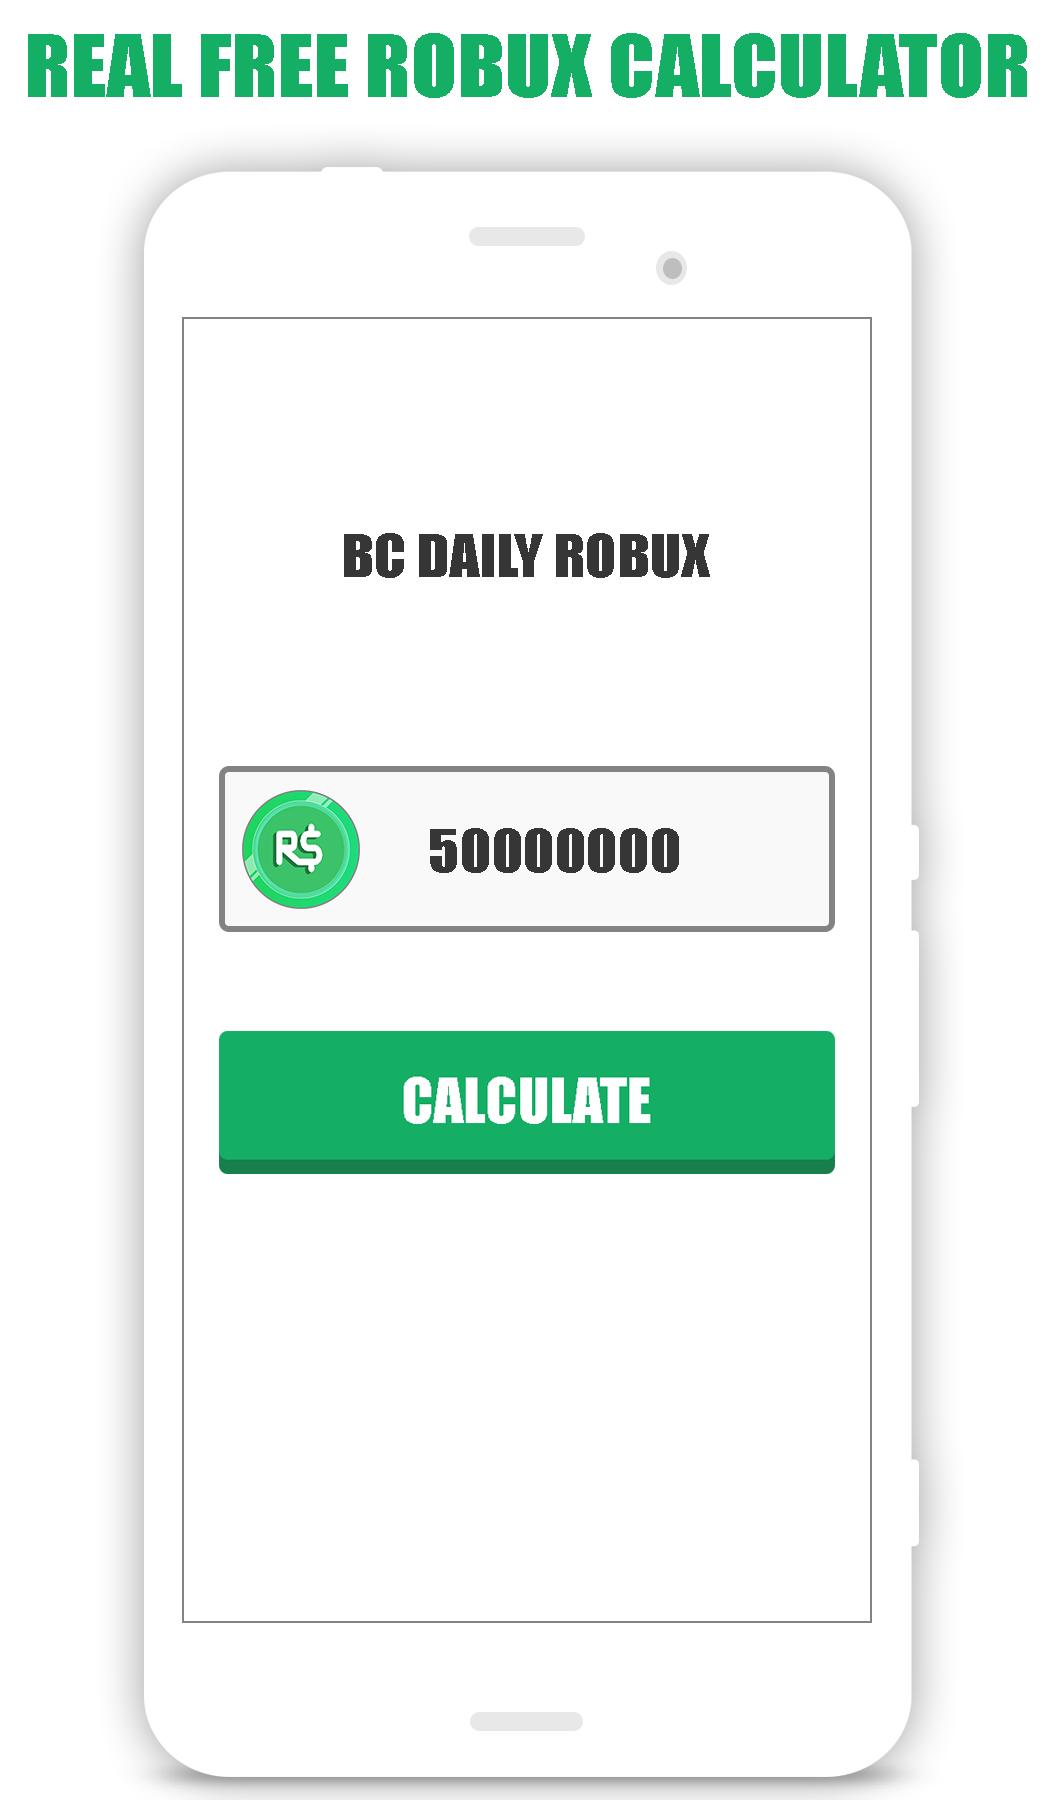 Free Robux Calculator For Roblox For Android Apk Download - roblox limited calculator